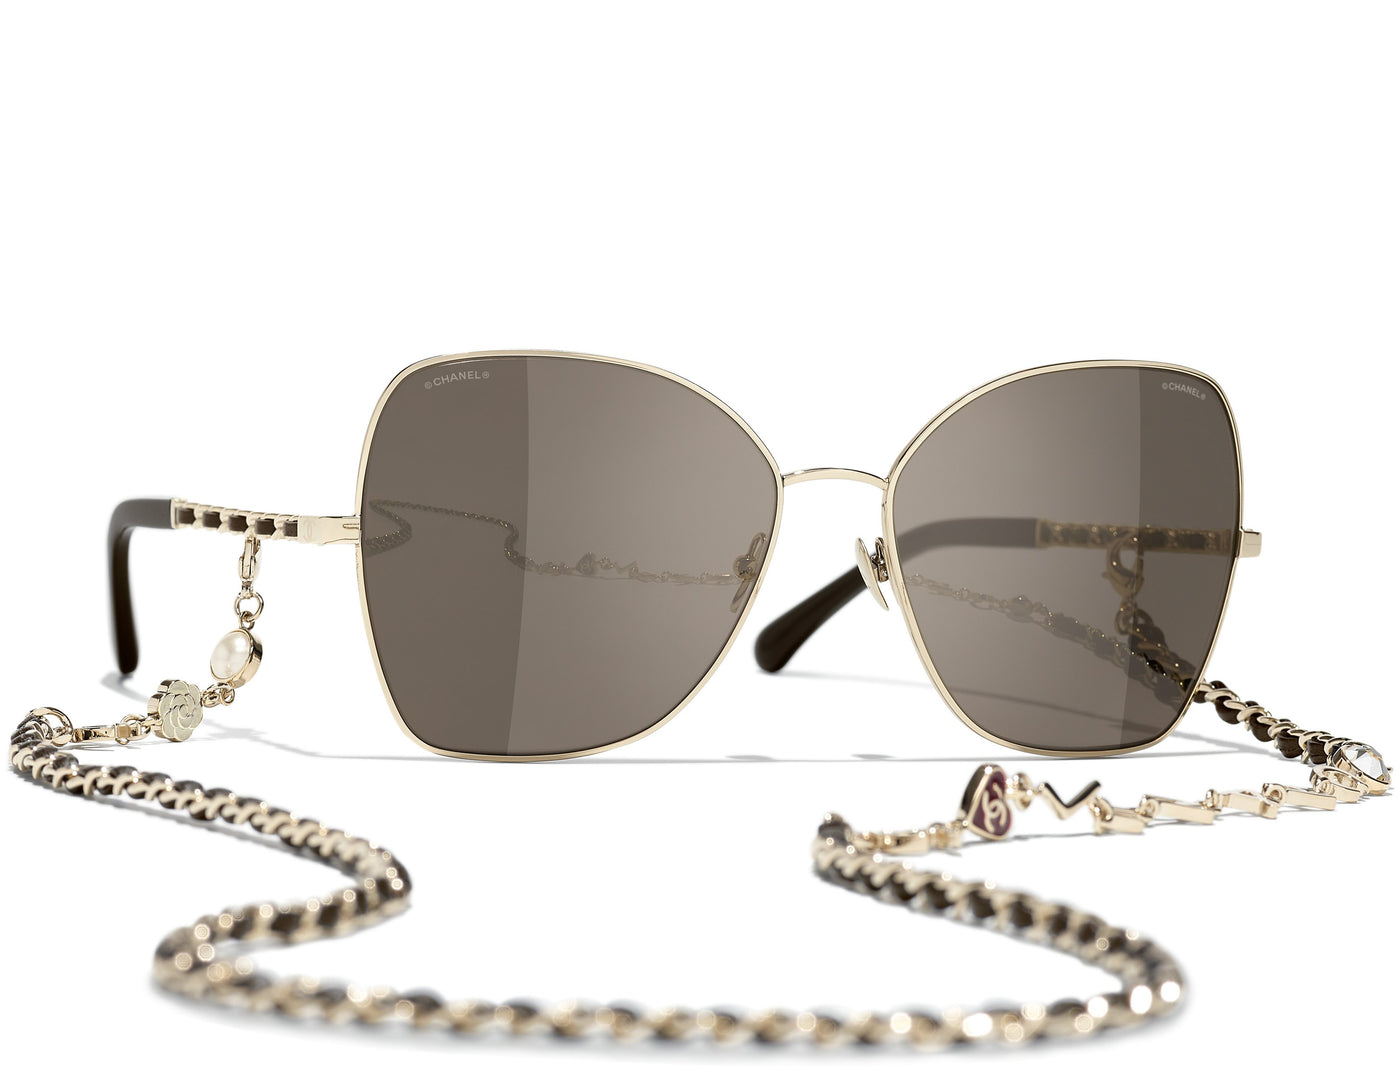 New In Stores Now CHANEL 4274 Q Butterfly Brown Gold Sunglasses